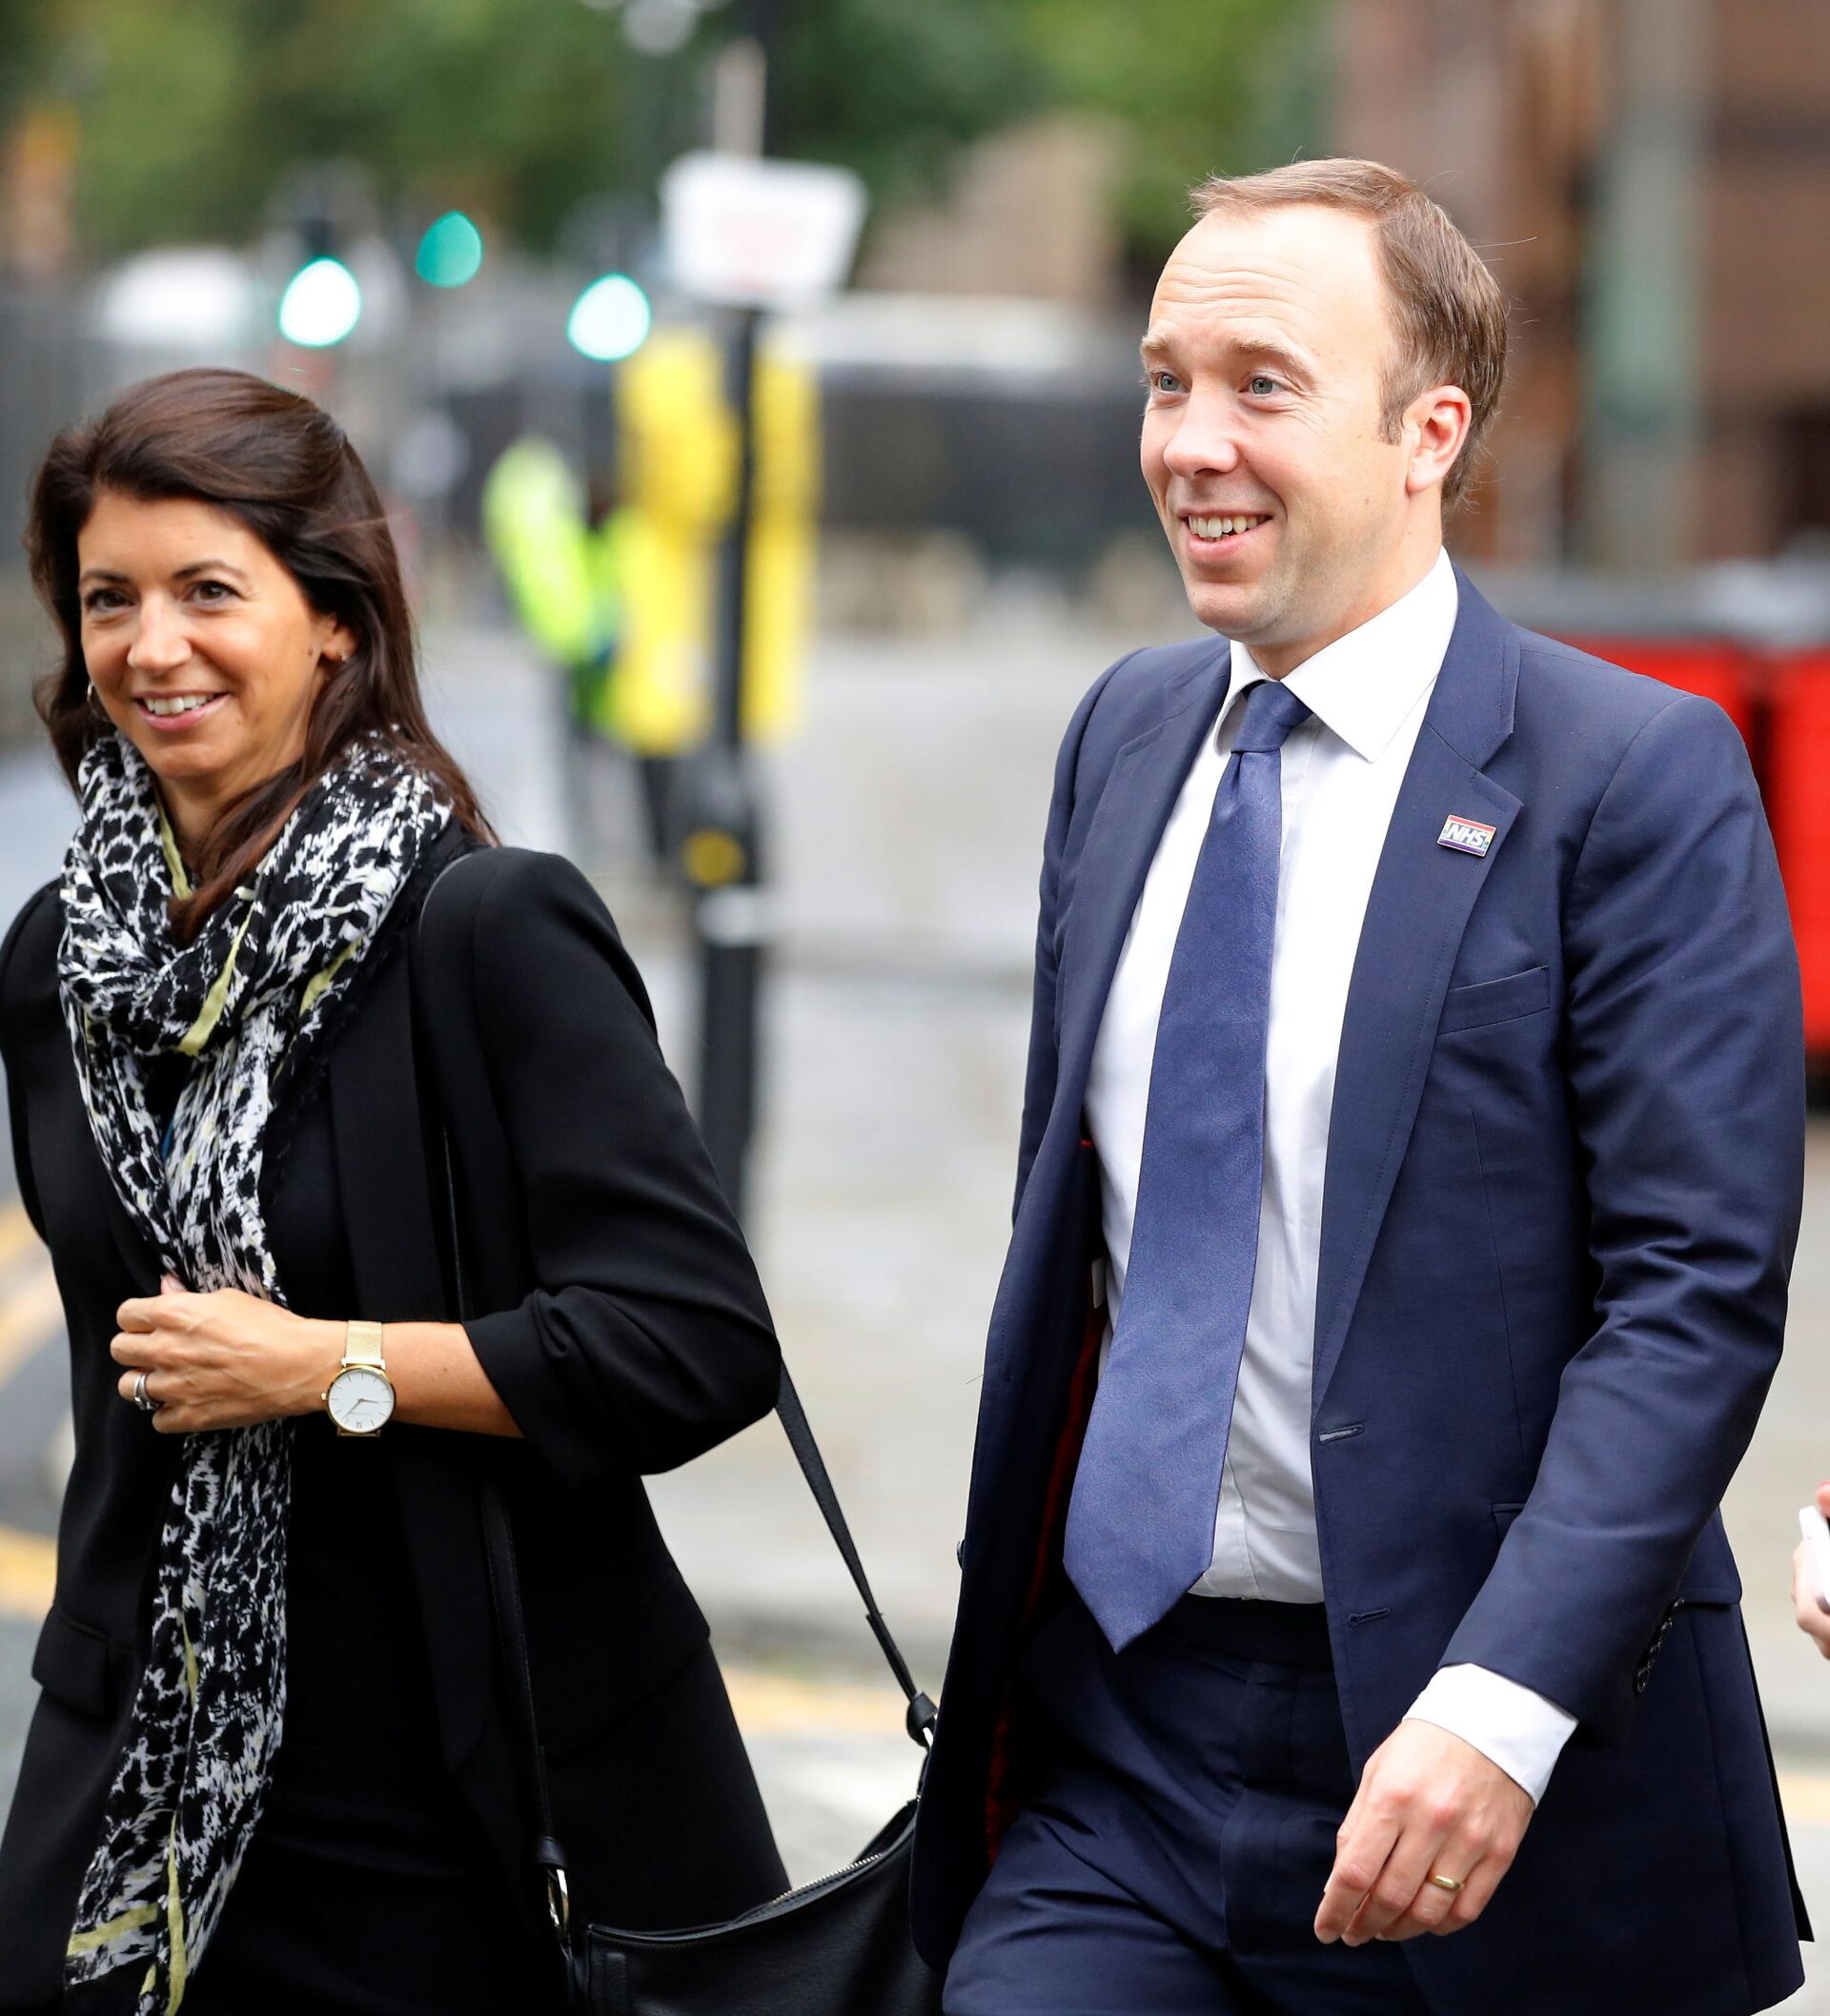 Britain's Secretary of State for Health Matt Hancock walks with his aide Gina Coladangelo outside the venue for the Conservative Party annual conference in Manchester, Britain, September 30, 2019. Picture taken September 30, 2019 - Sputnik International, 1920, 07.09.2021